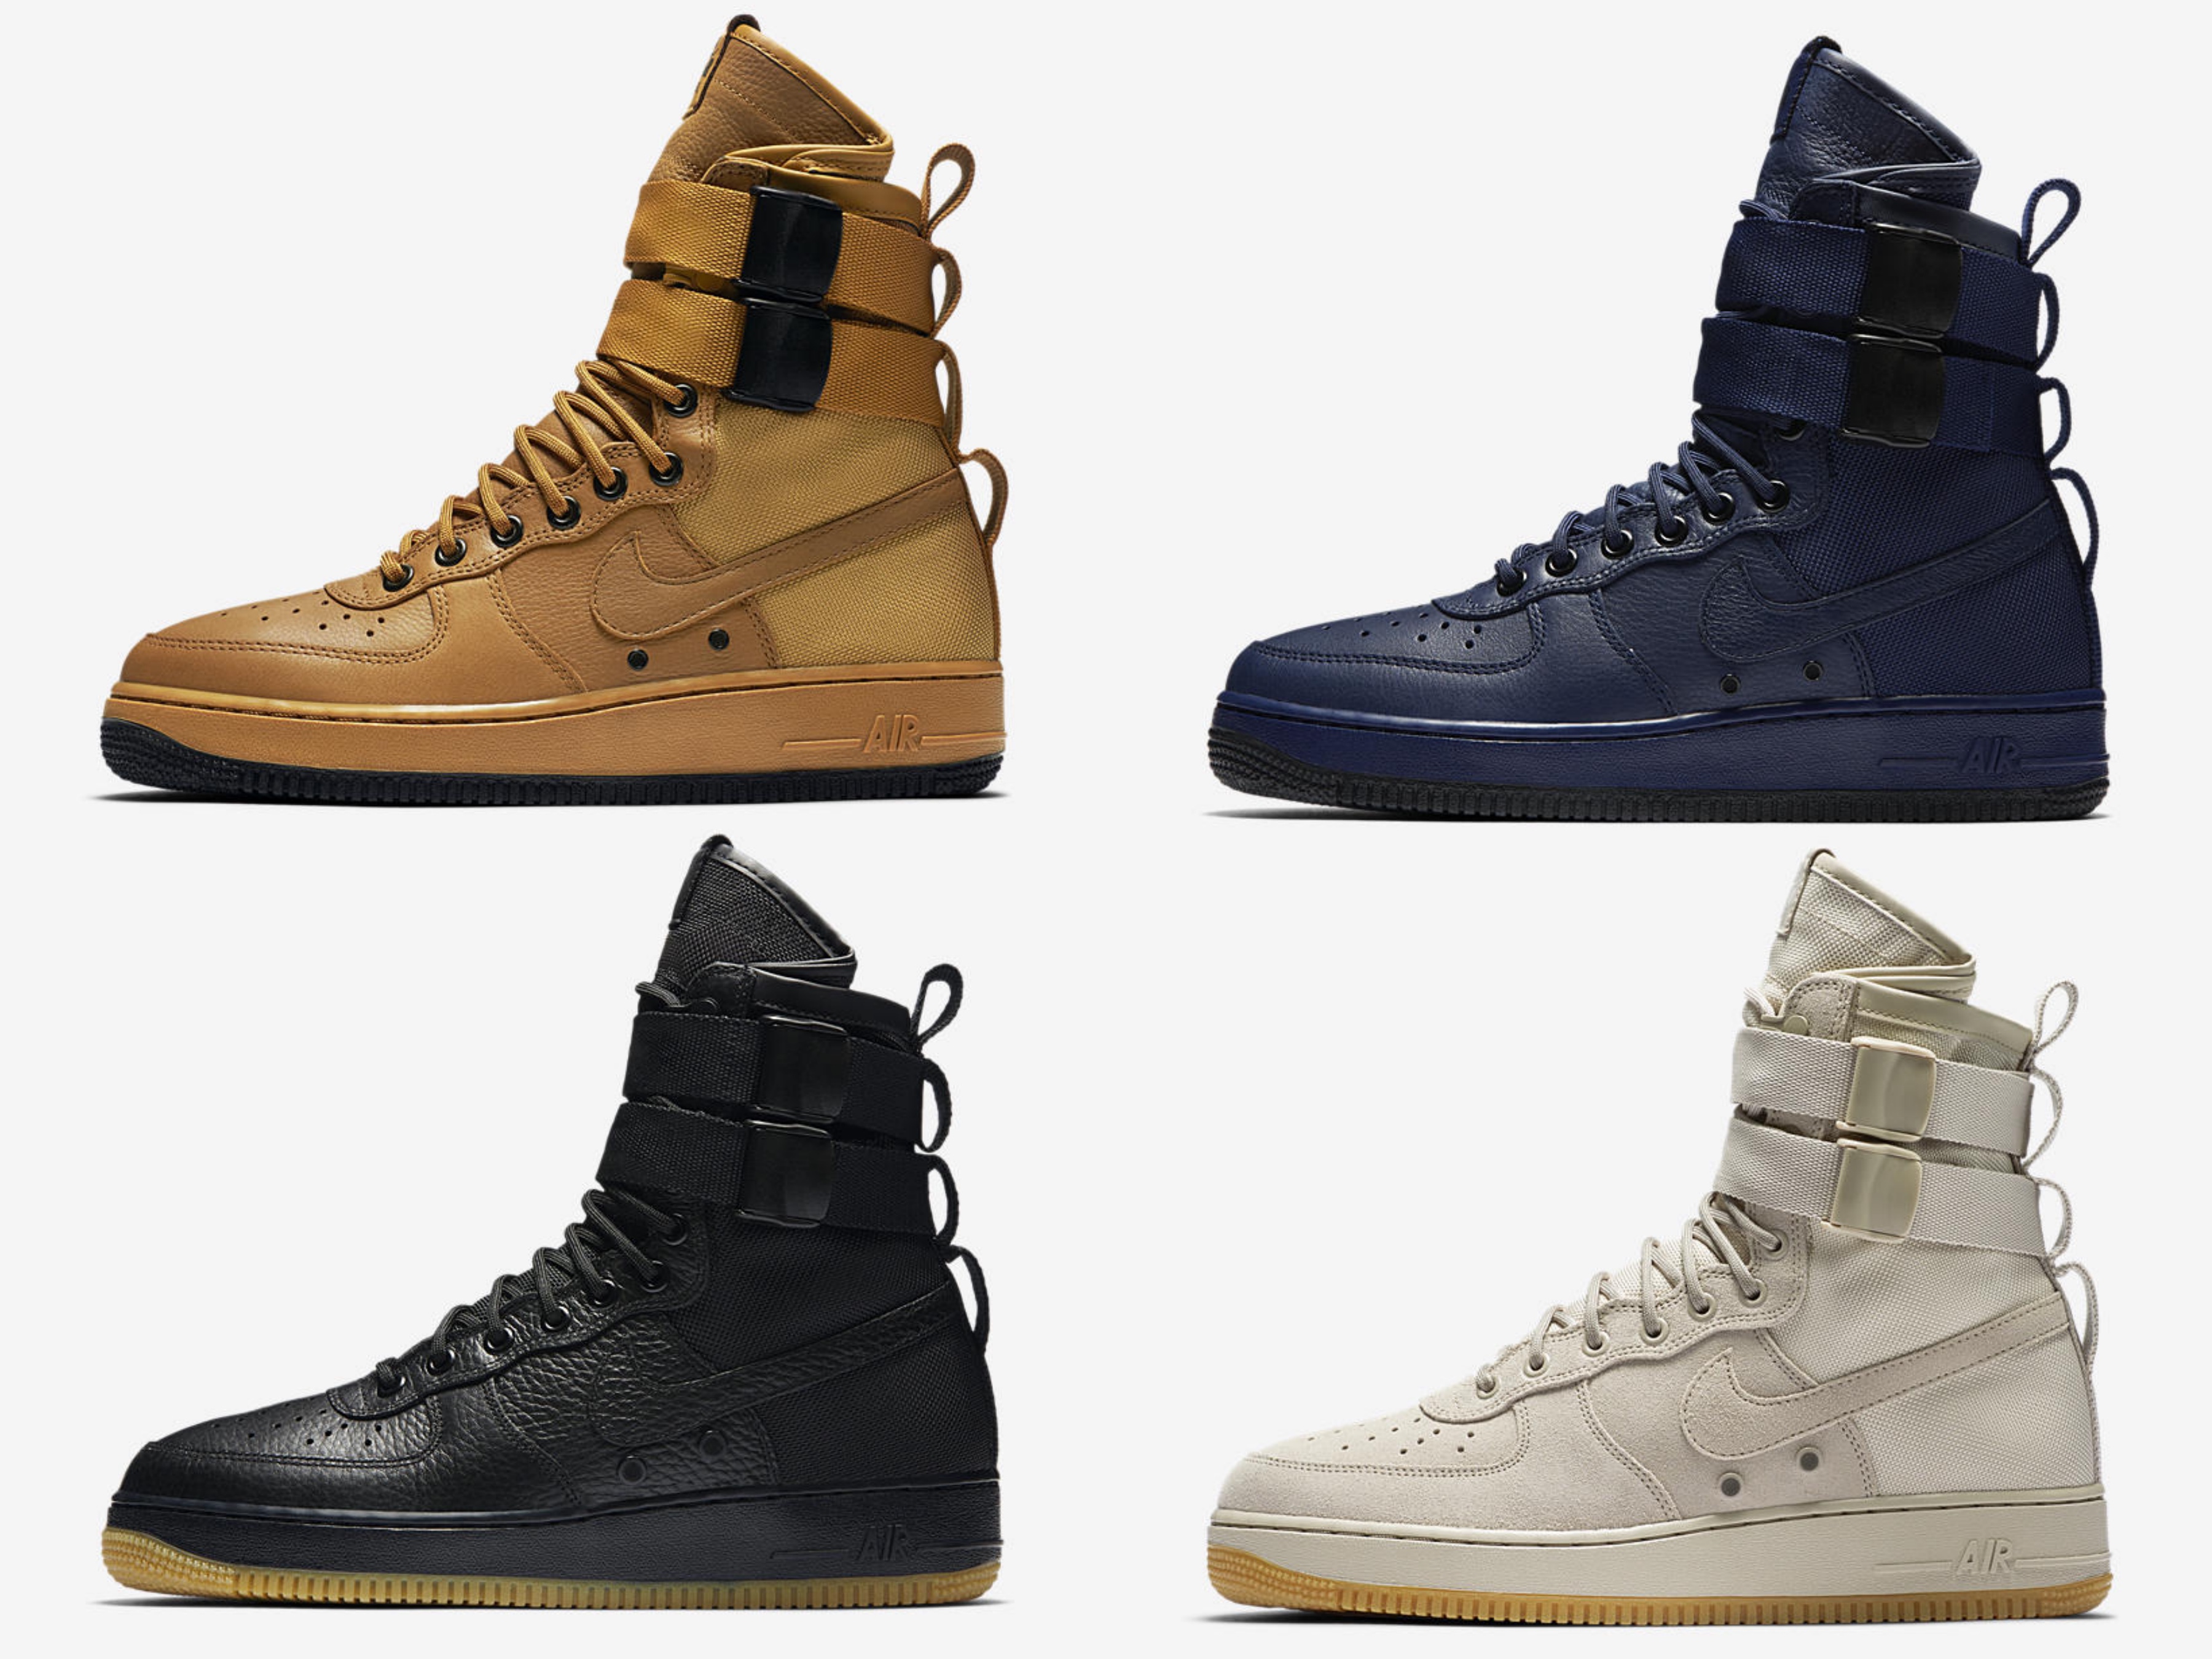 The Nike Special Field Air Force 1 is Available Now in 4 Colorways ... العنصر